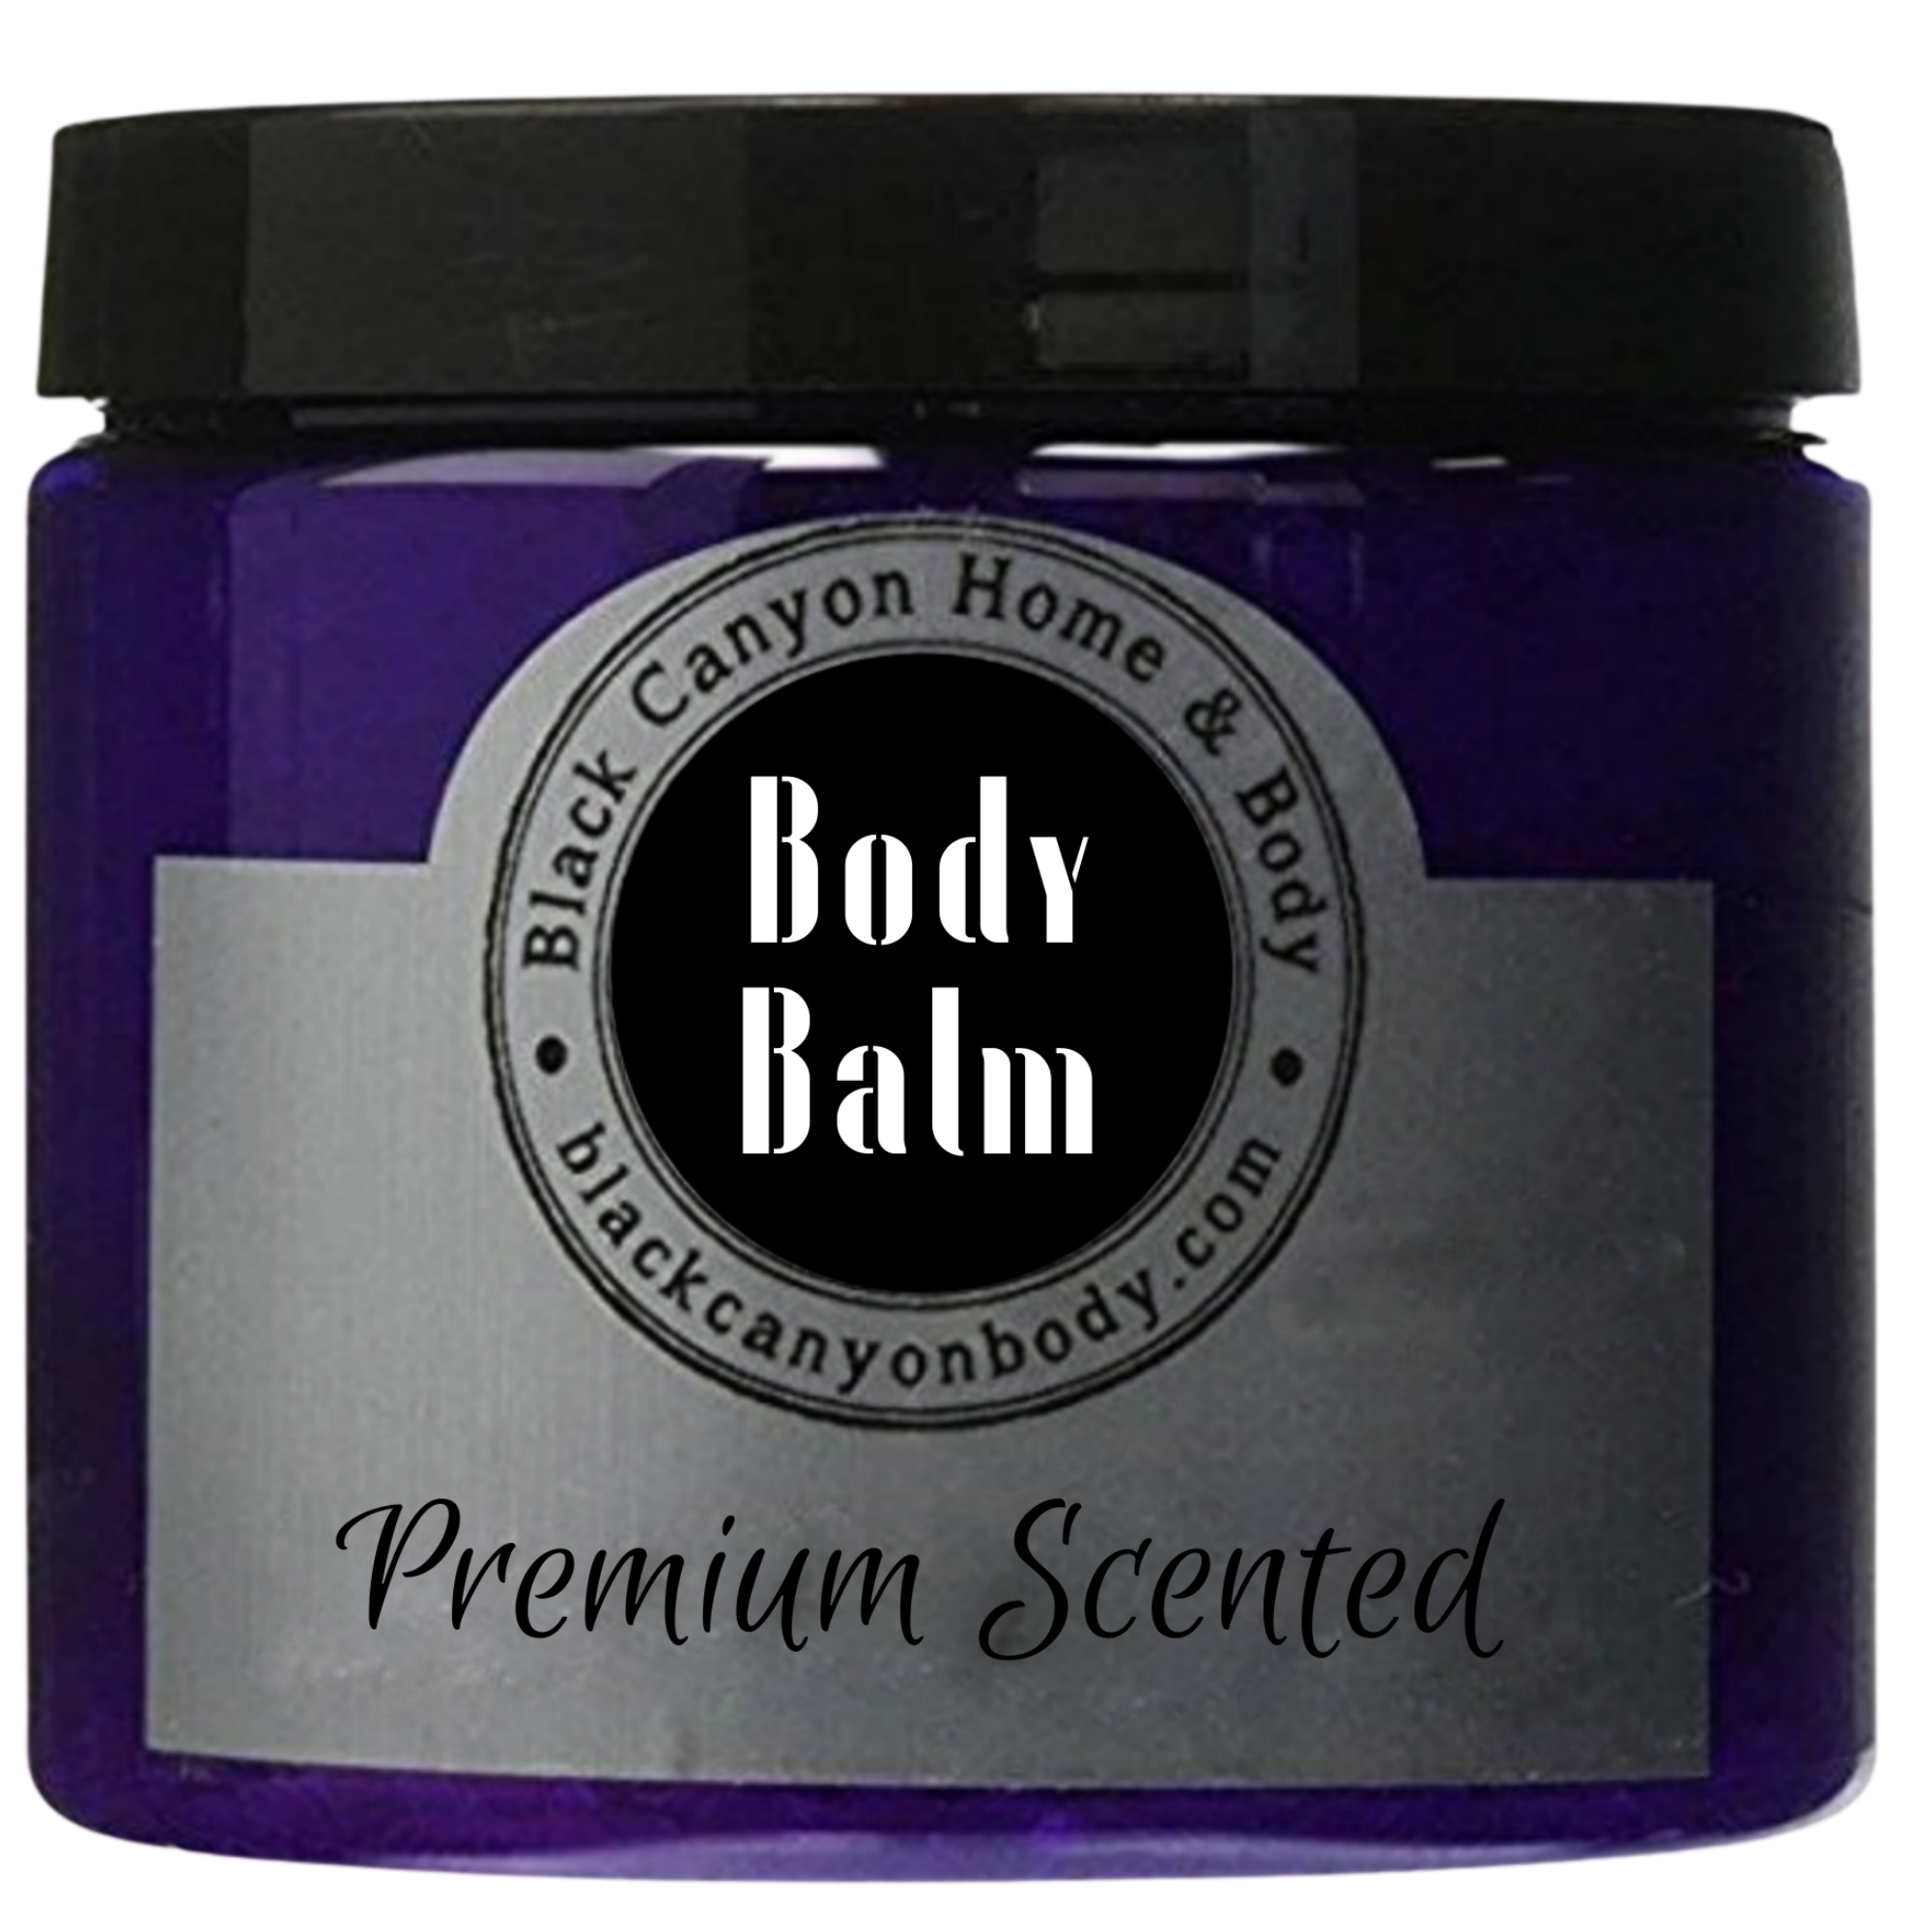 Black Canyon Fortune Cookie Scented Natural Body Balm with Shea